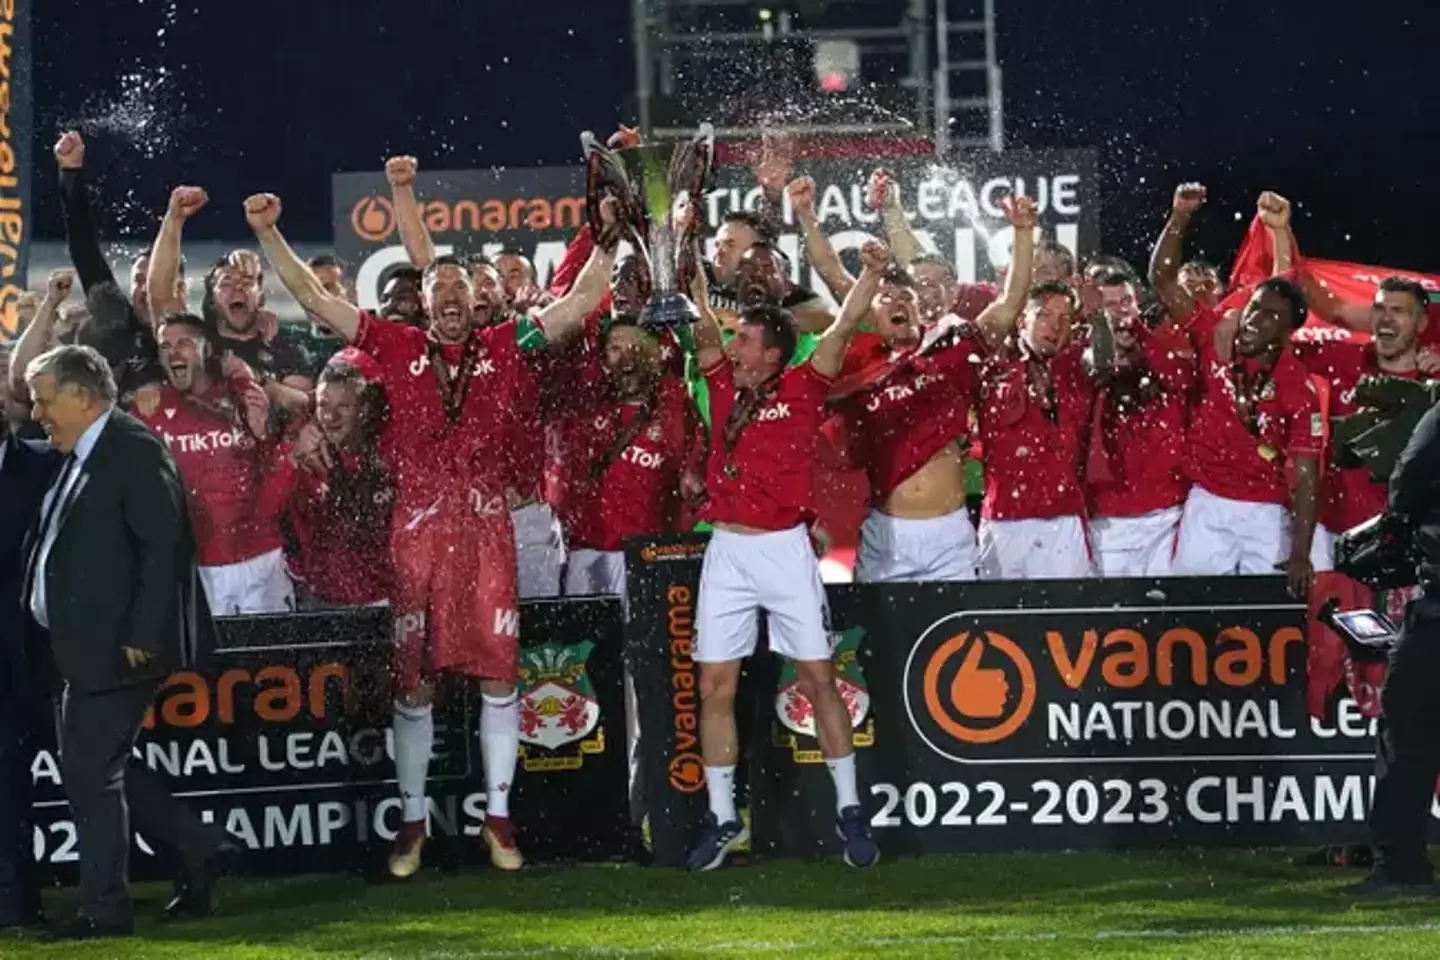 On 22 April, Fear watched the team live and witnessed Wrexham win promotion back to the Football League after a 15-year absence.